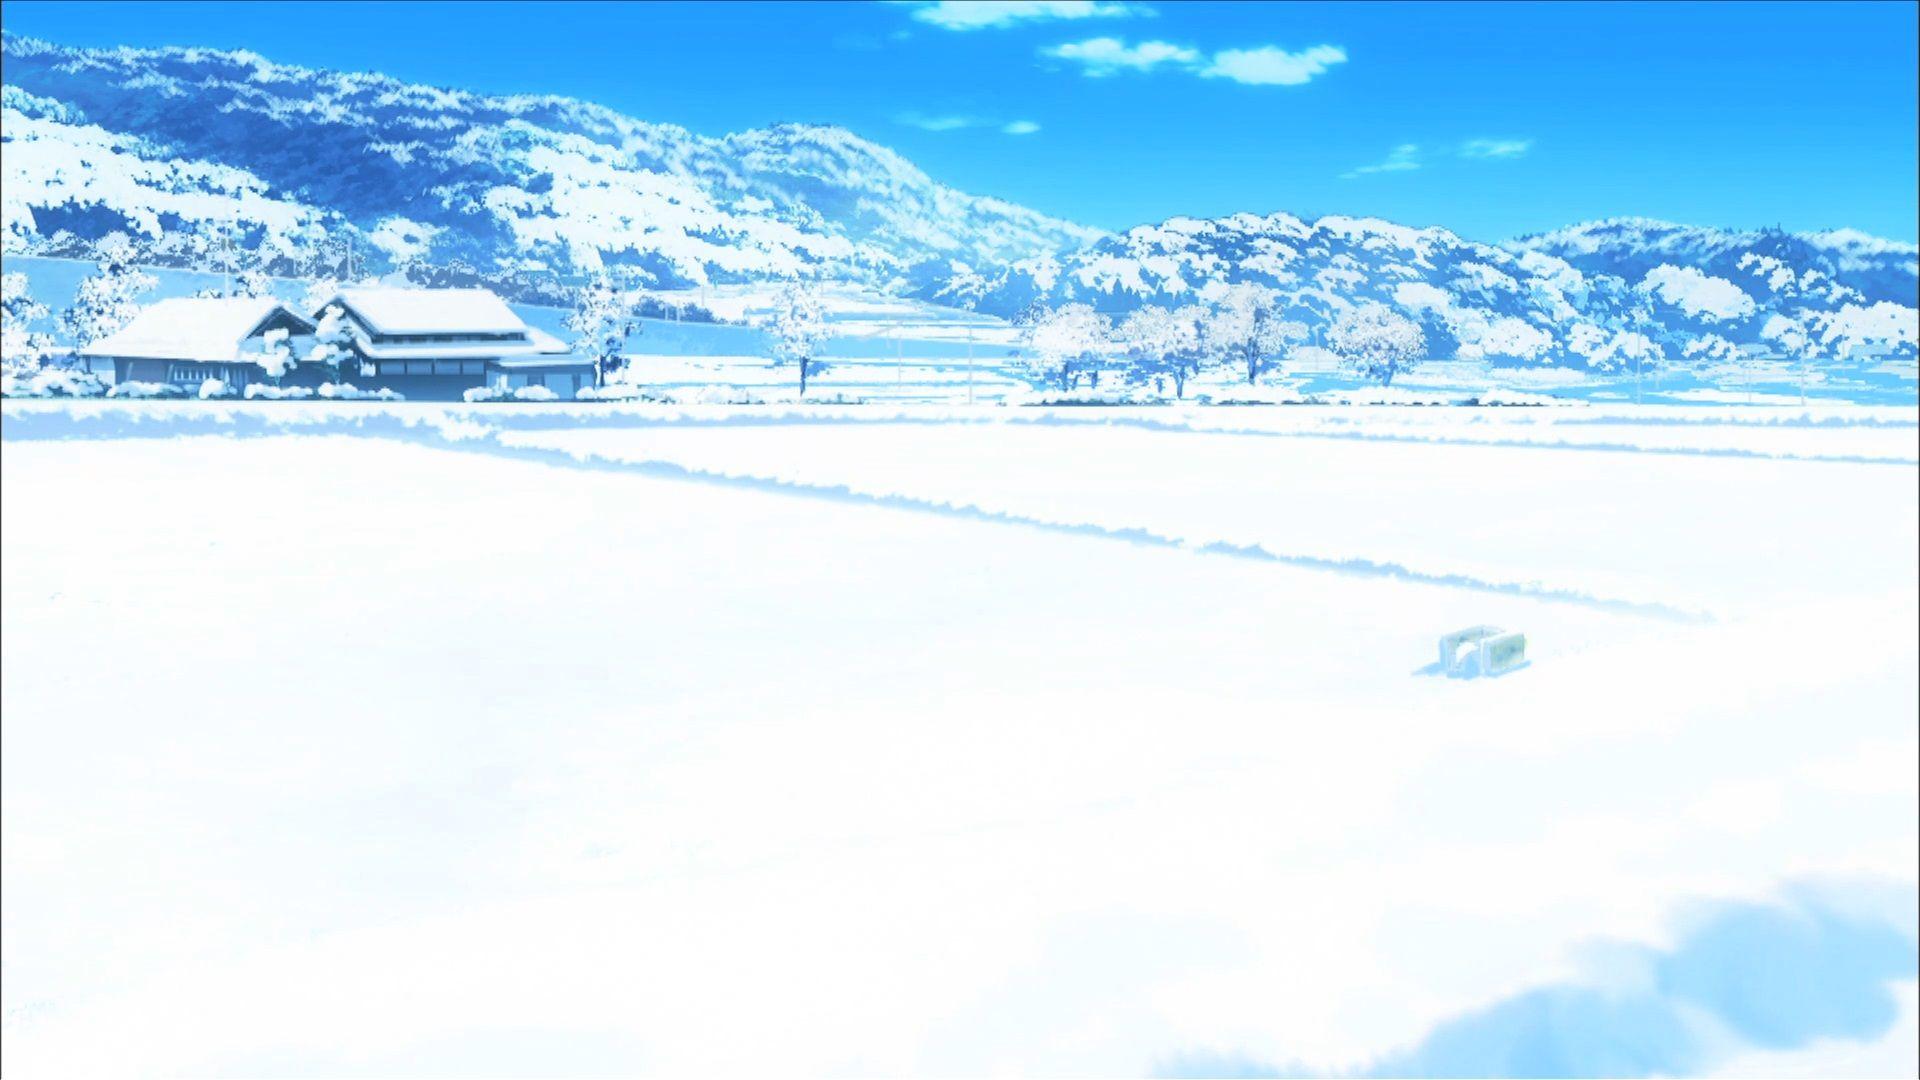 1,844 Snow Background Anime Images, Stock Photos & Vectors | Shutterstock